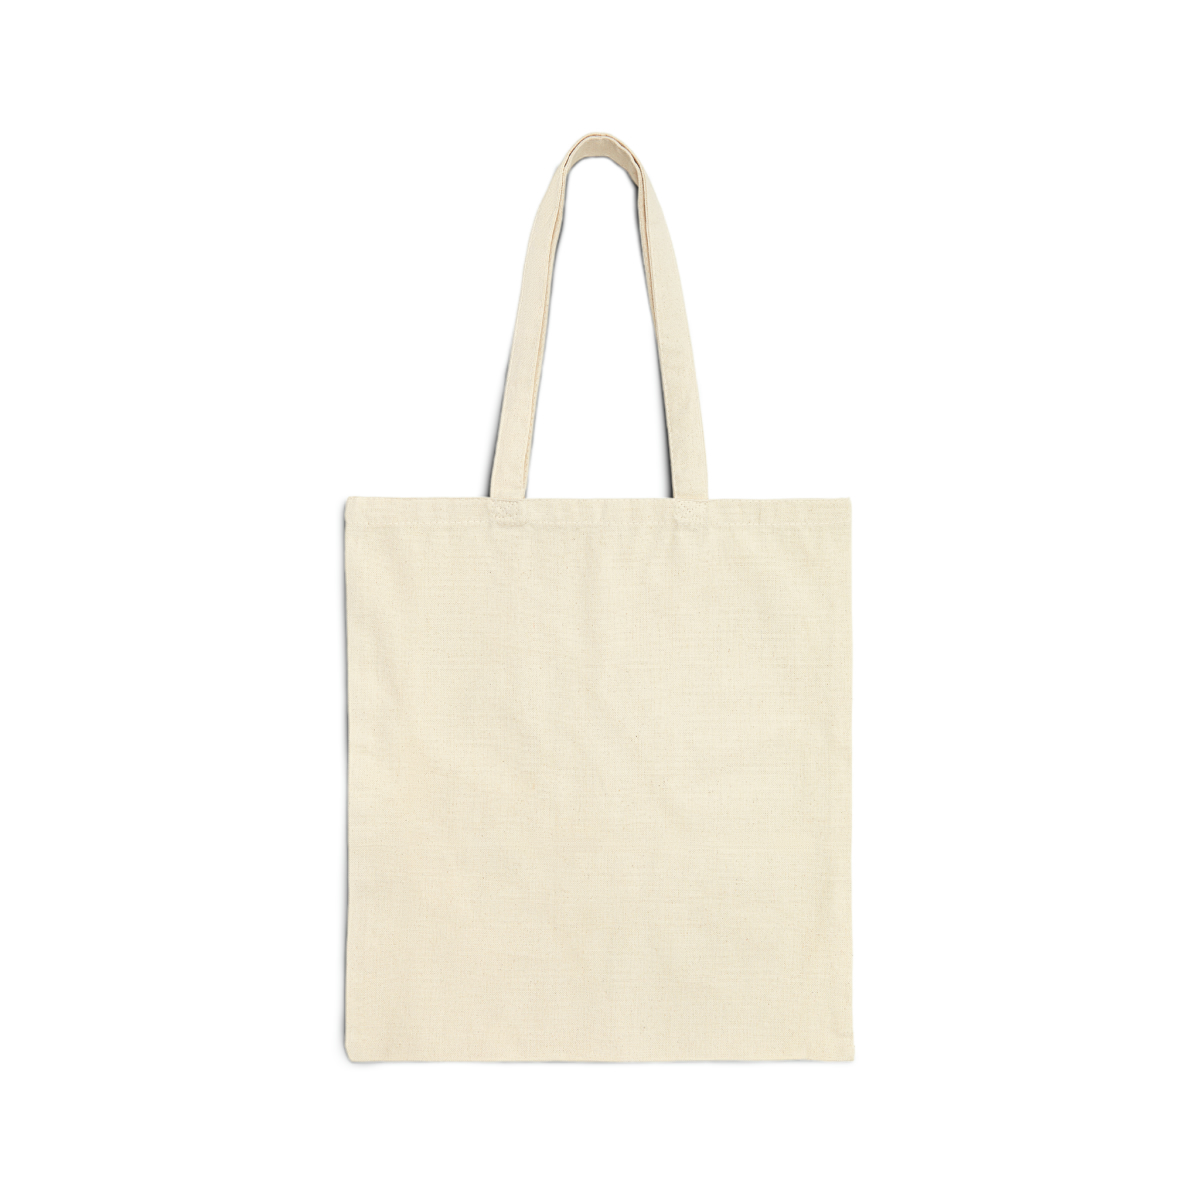 There was Jesus tote bag